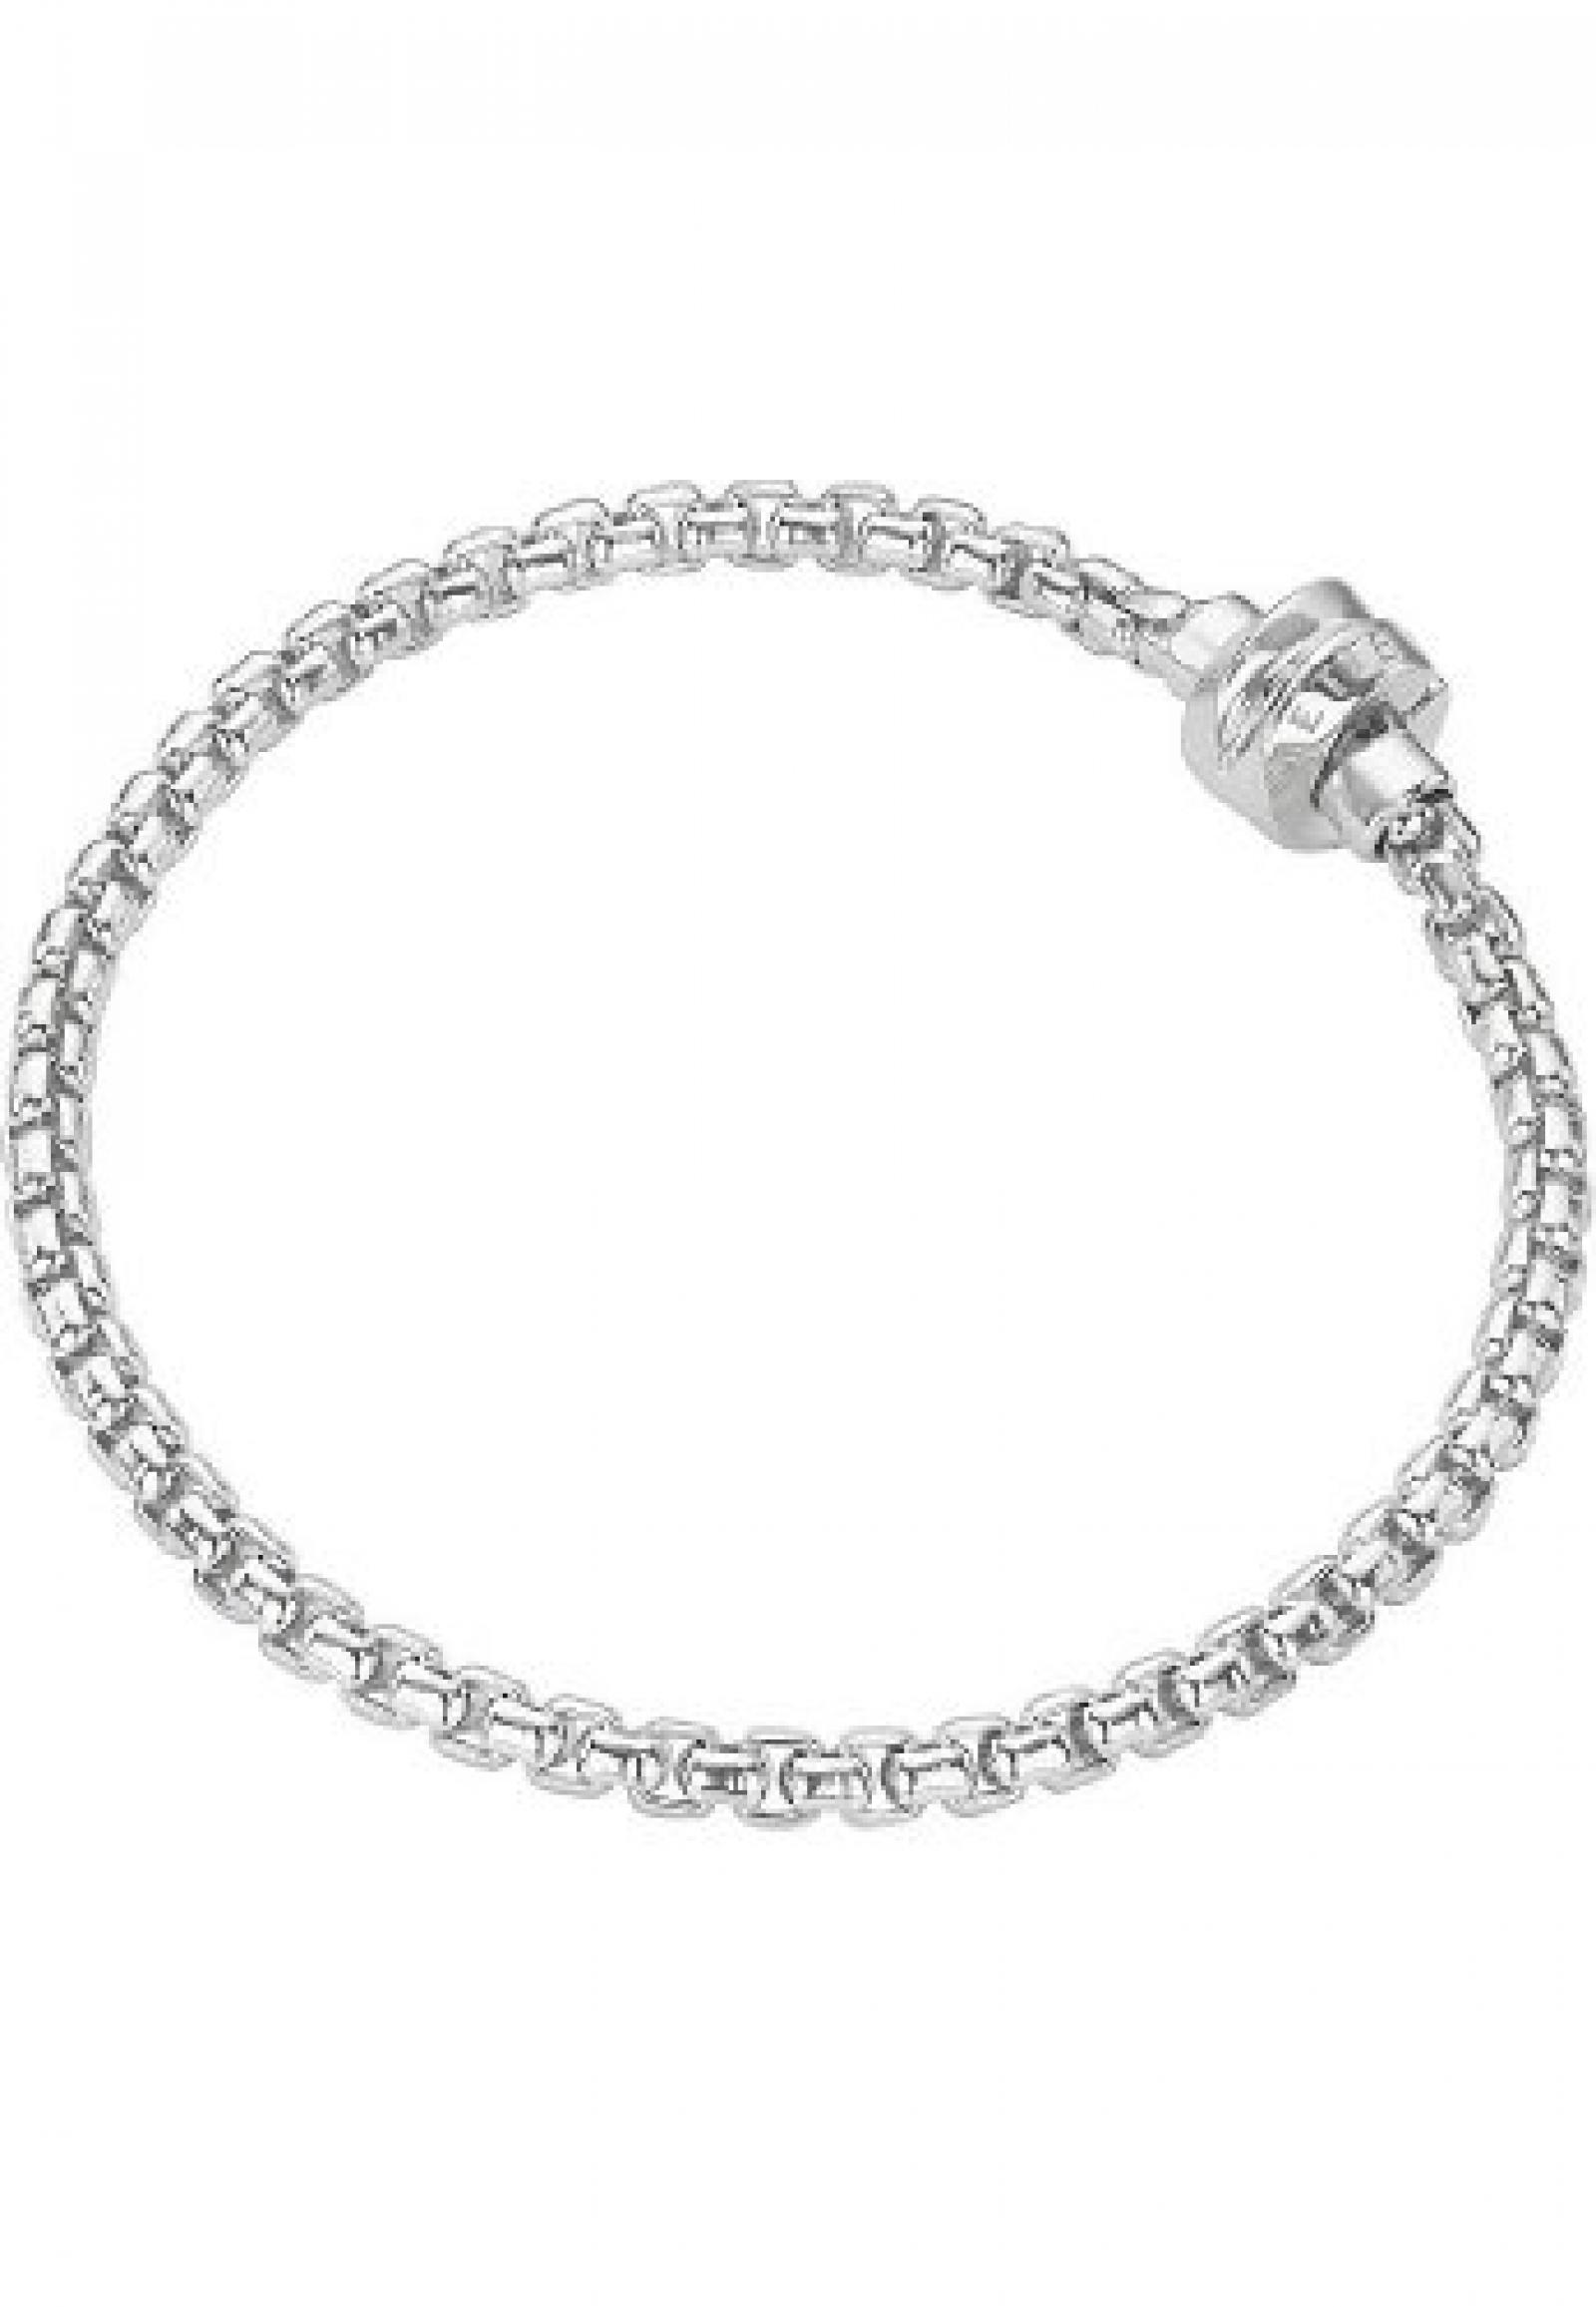 JETTE Pure Passion Damen-Armband für Charms Armband Silber (silber) 